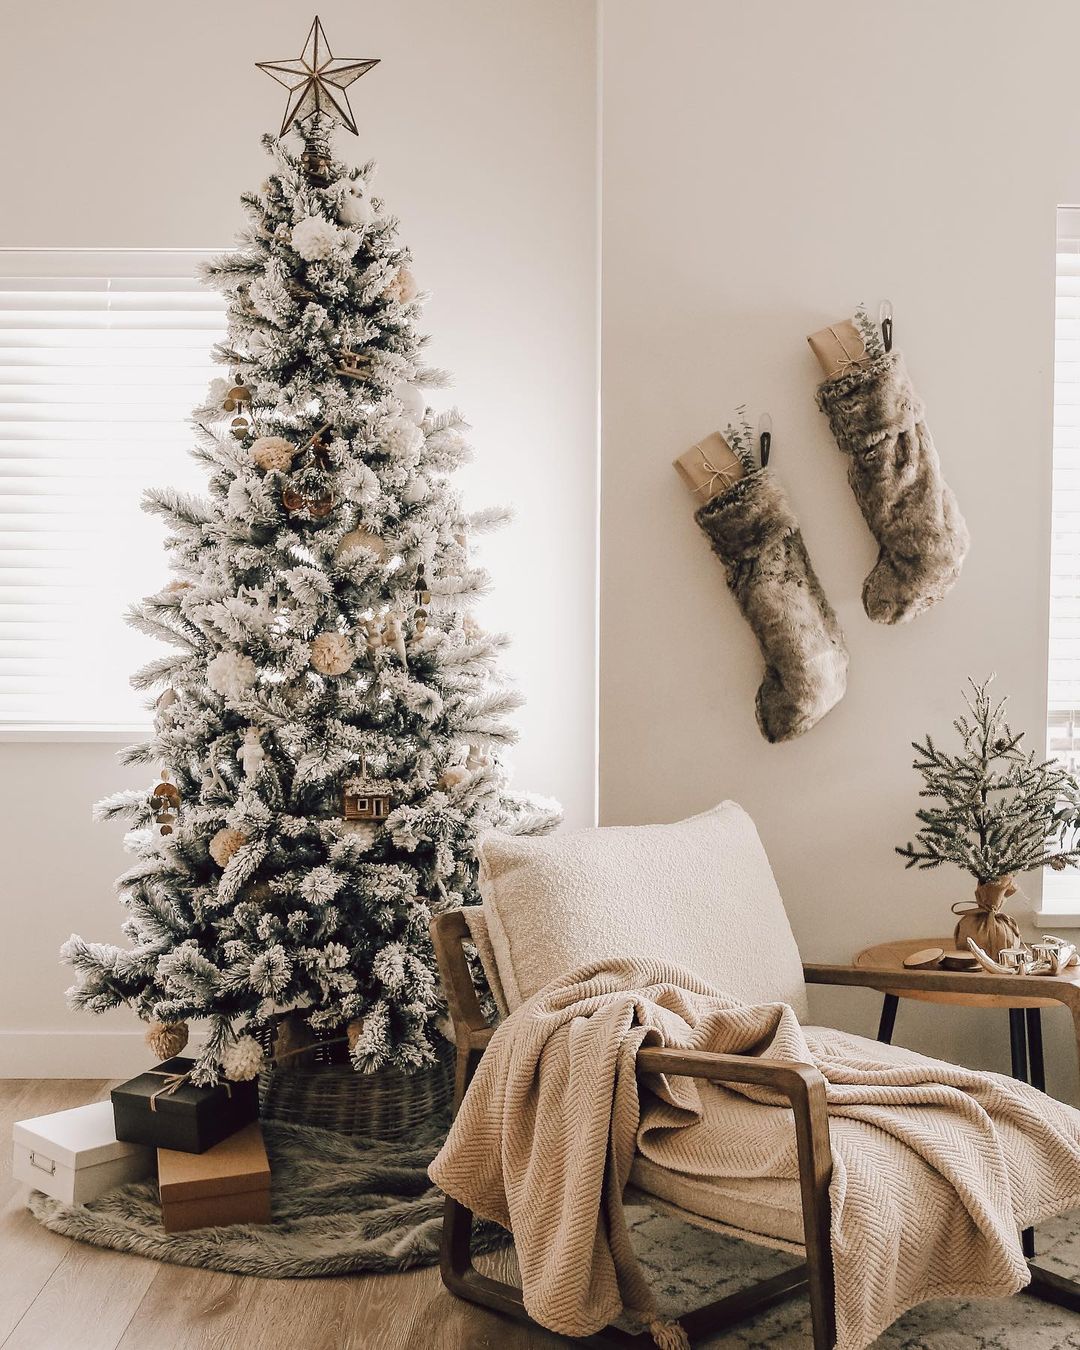 Wall-Mounted Stockings by the Tree